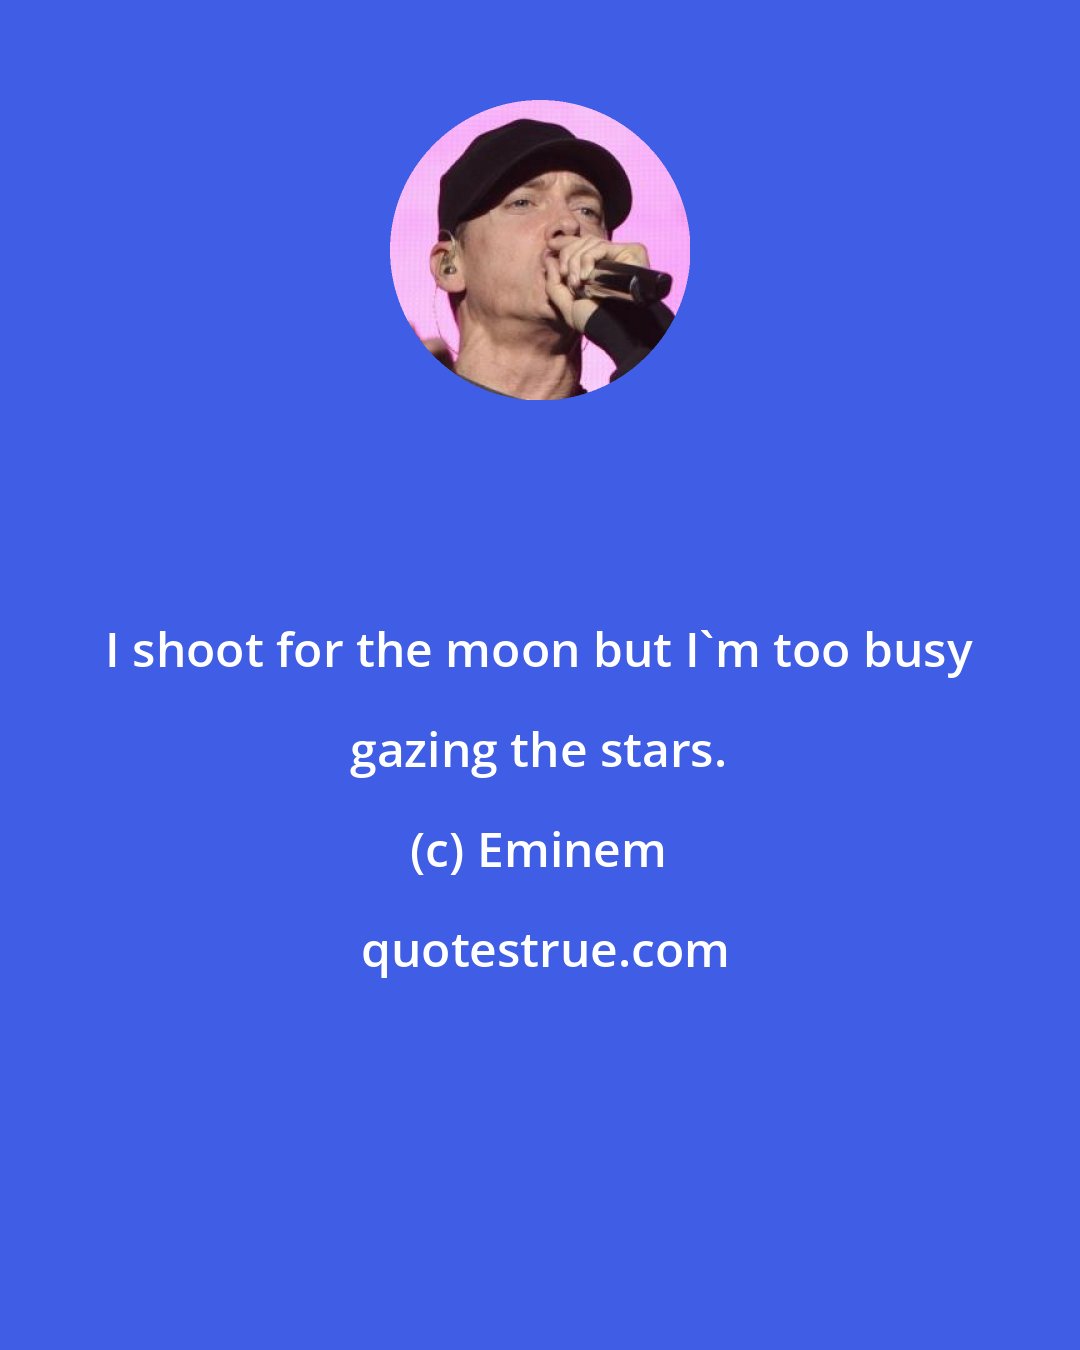 Eminem: I shoot for the moon but I'm too busy gazing the stars.